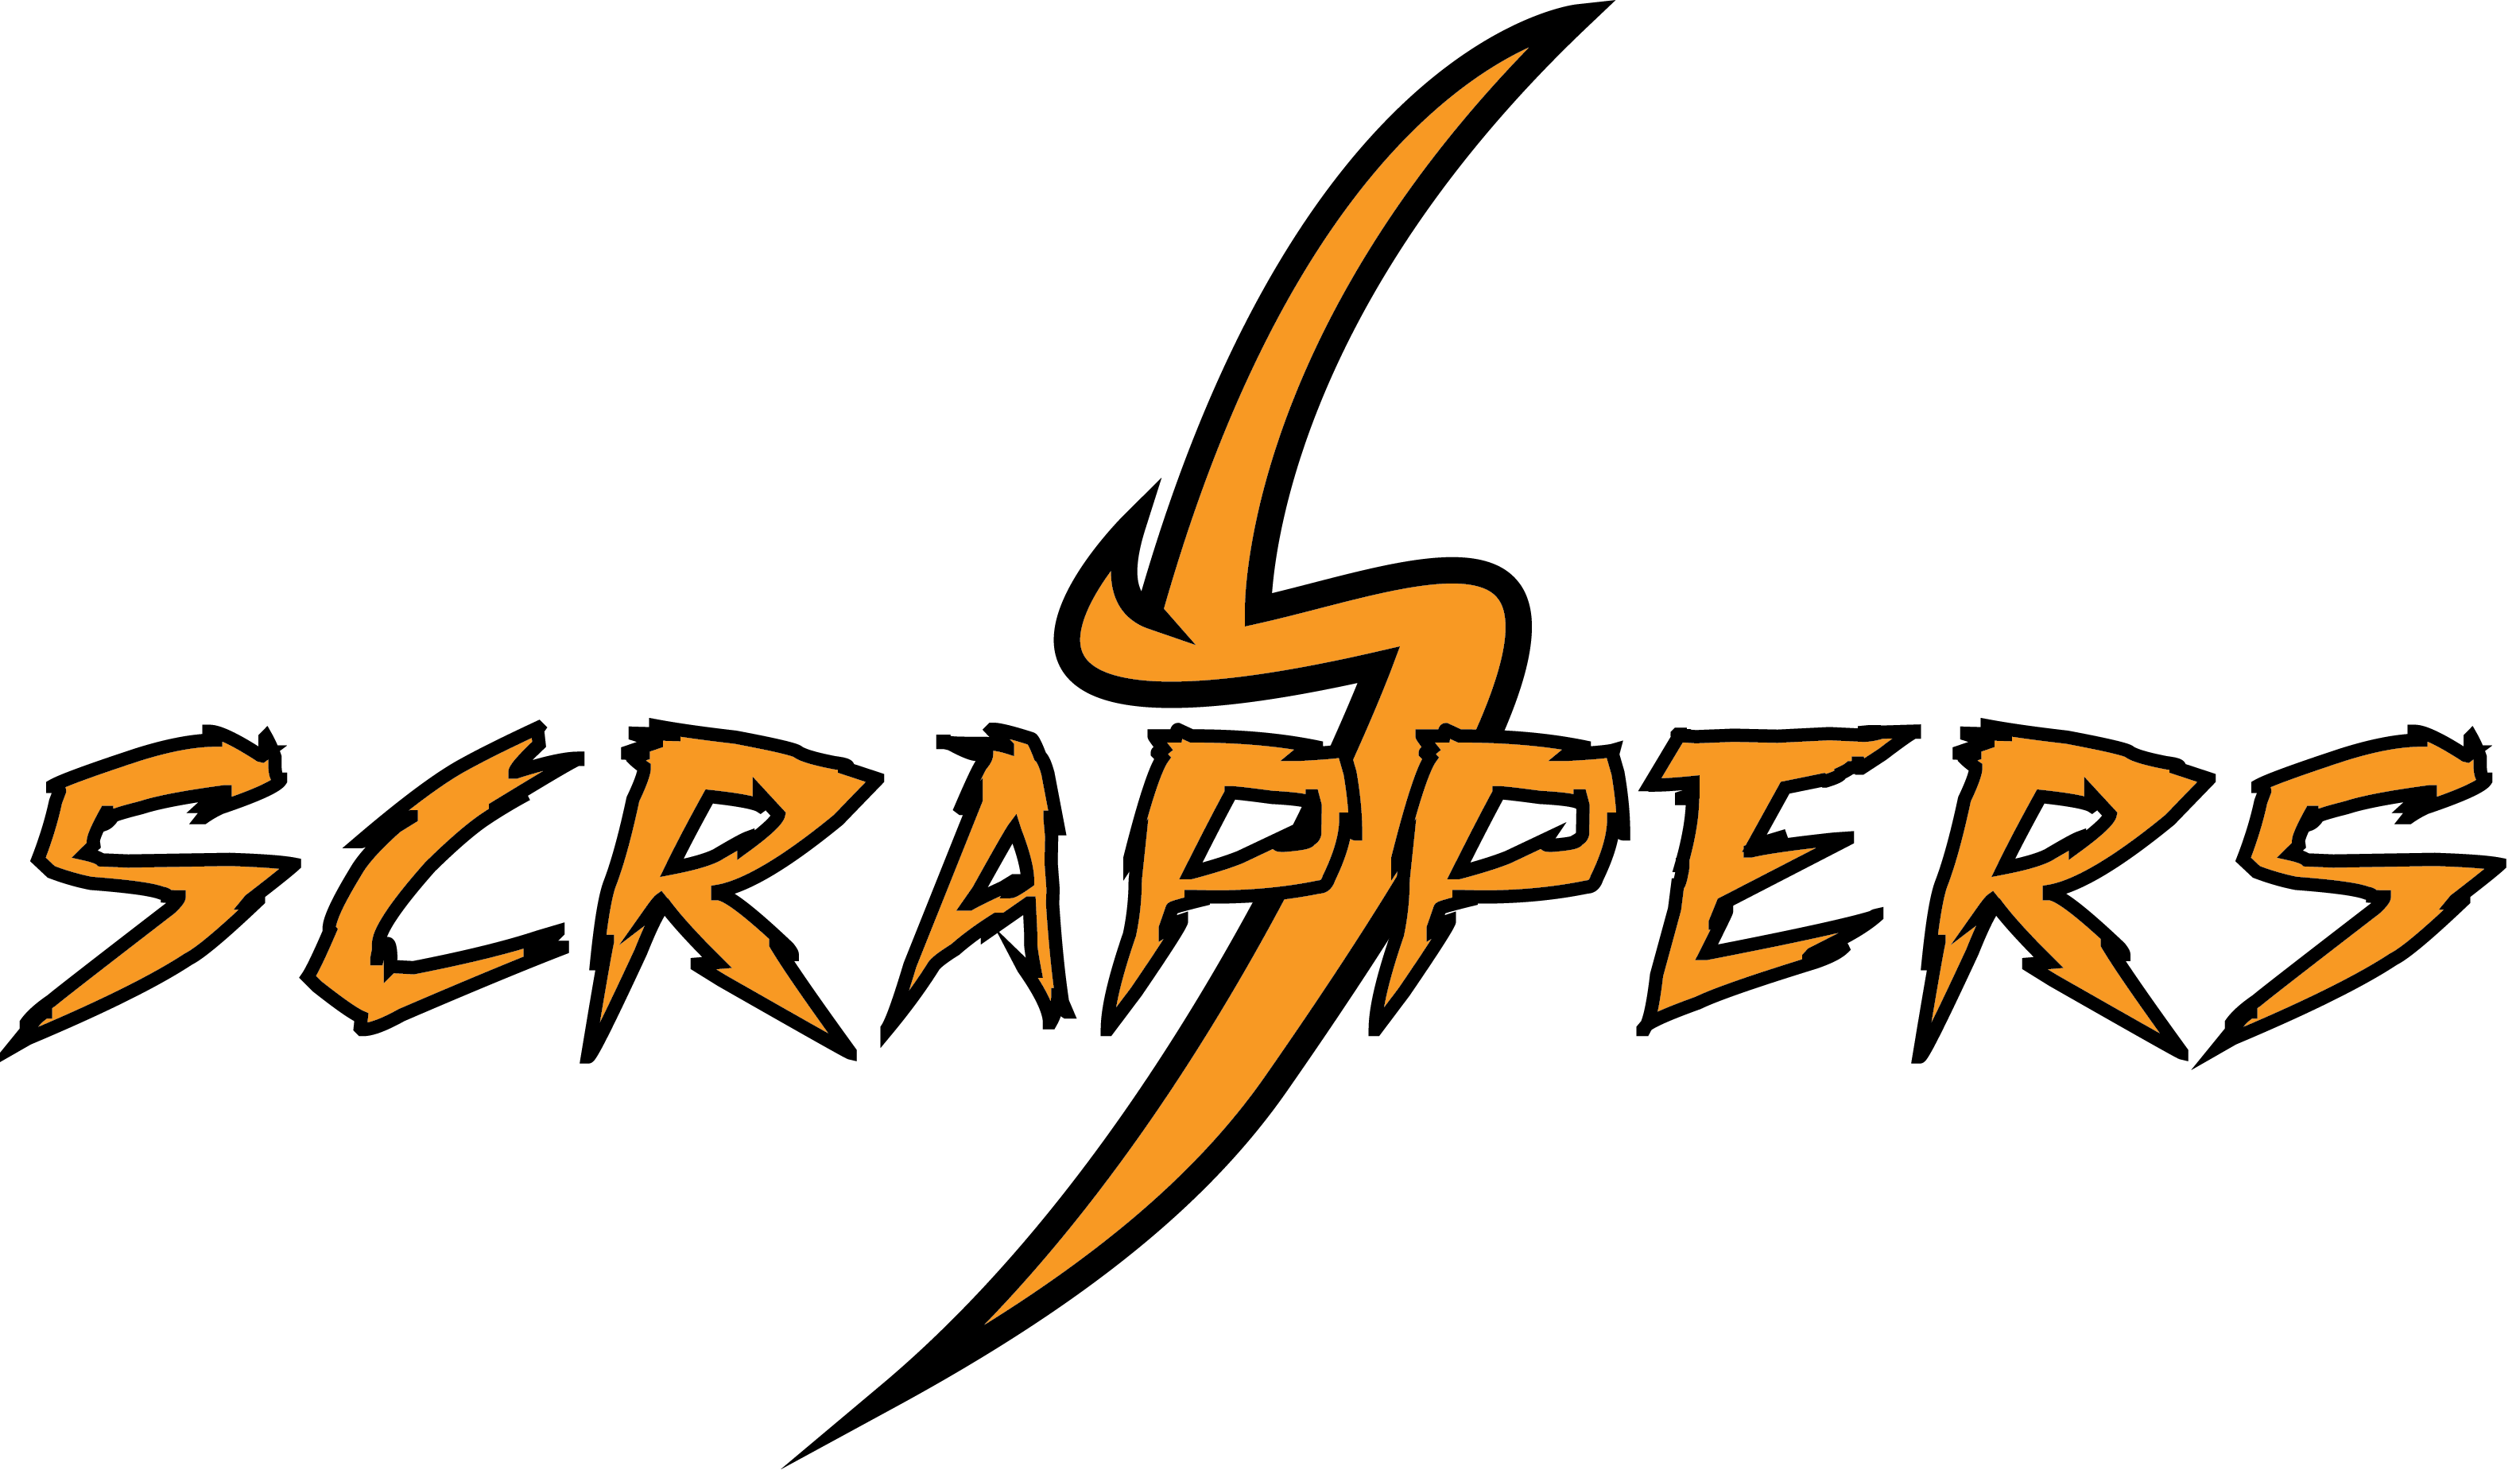 Scrappers logo with slash S and the word Scrappers outlined in black with golden yellow text